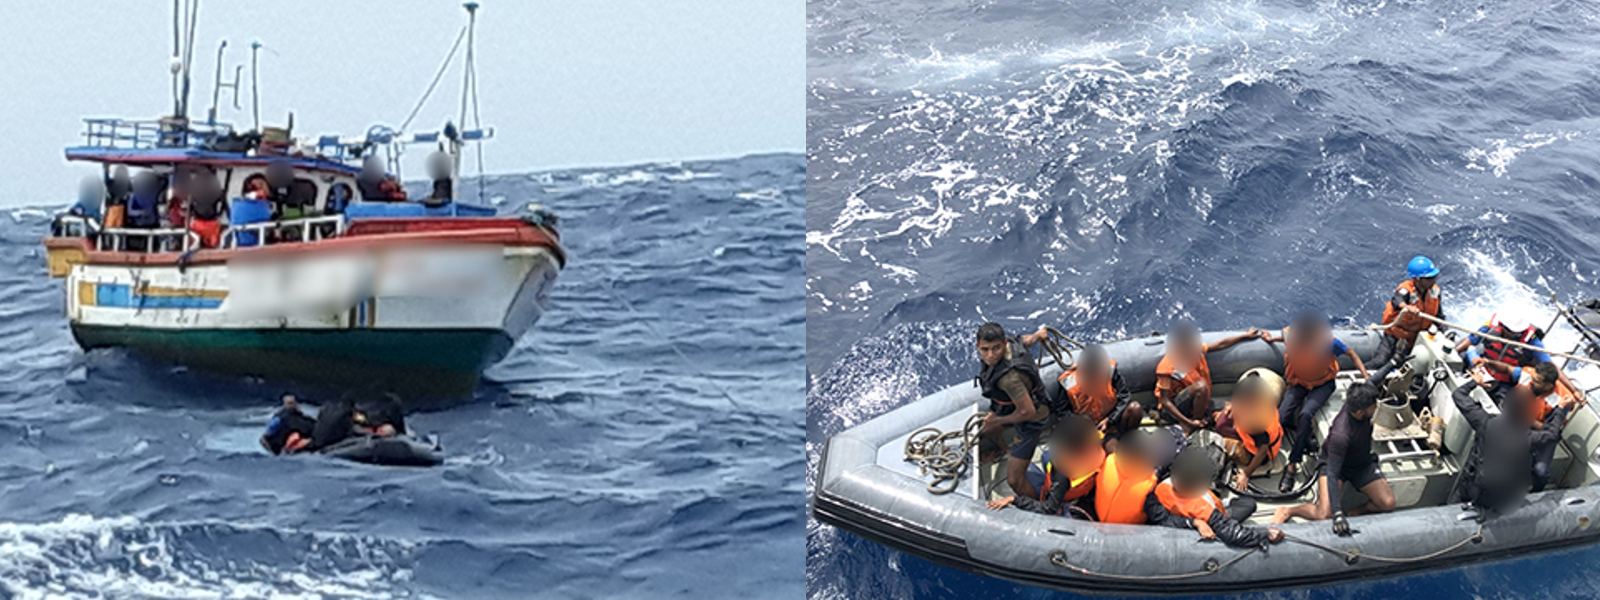 Navy rescues 55 suspected illegal migrants